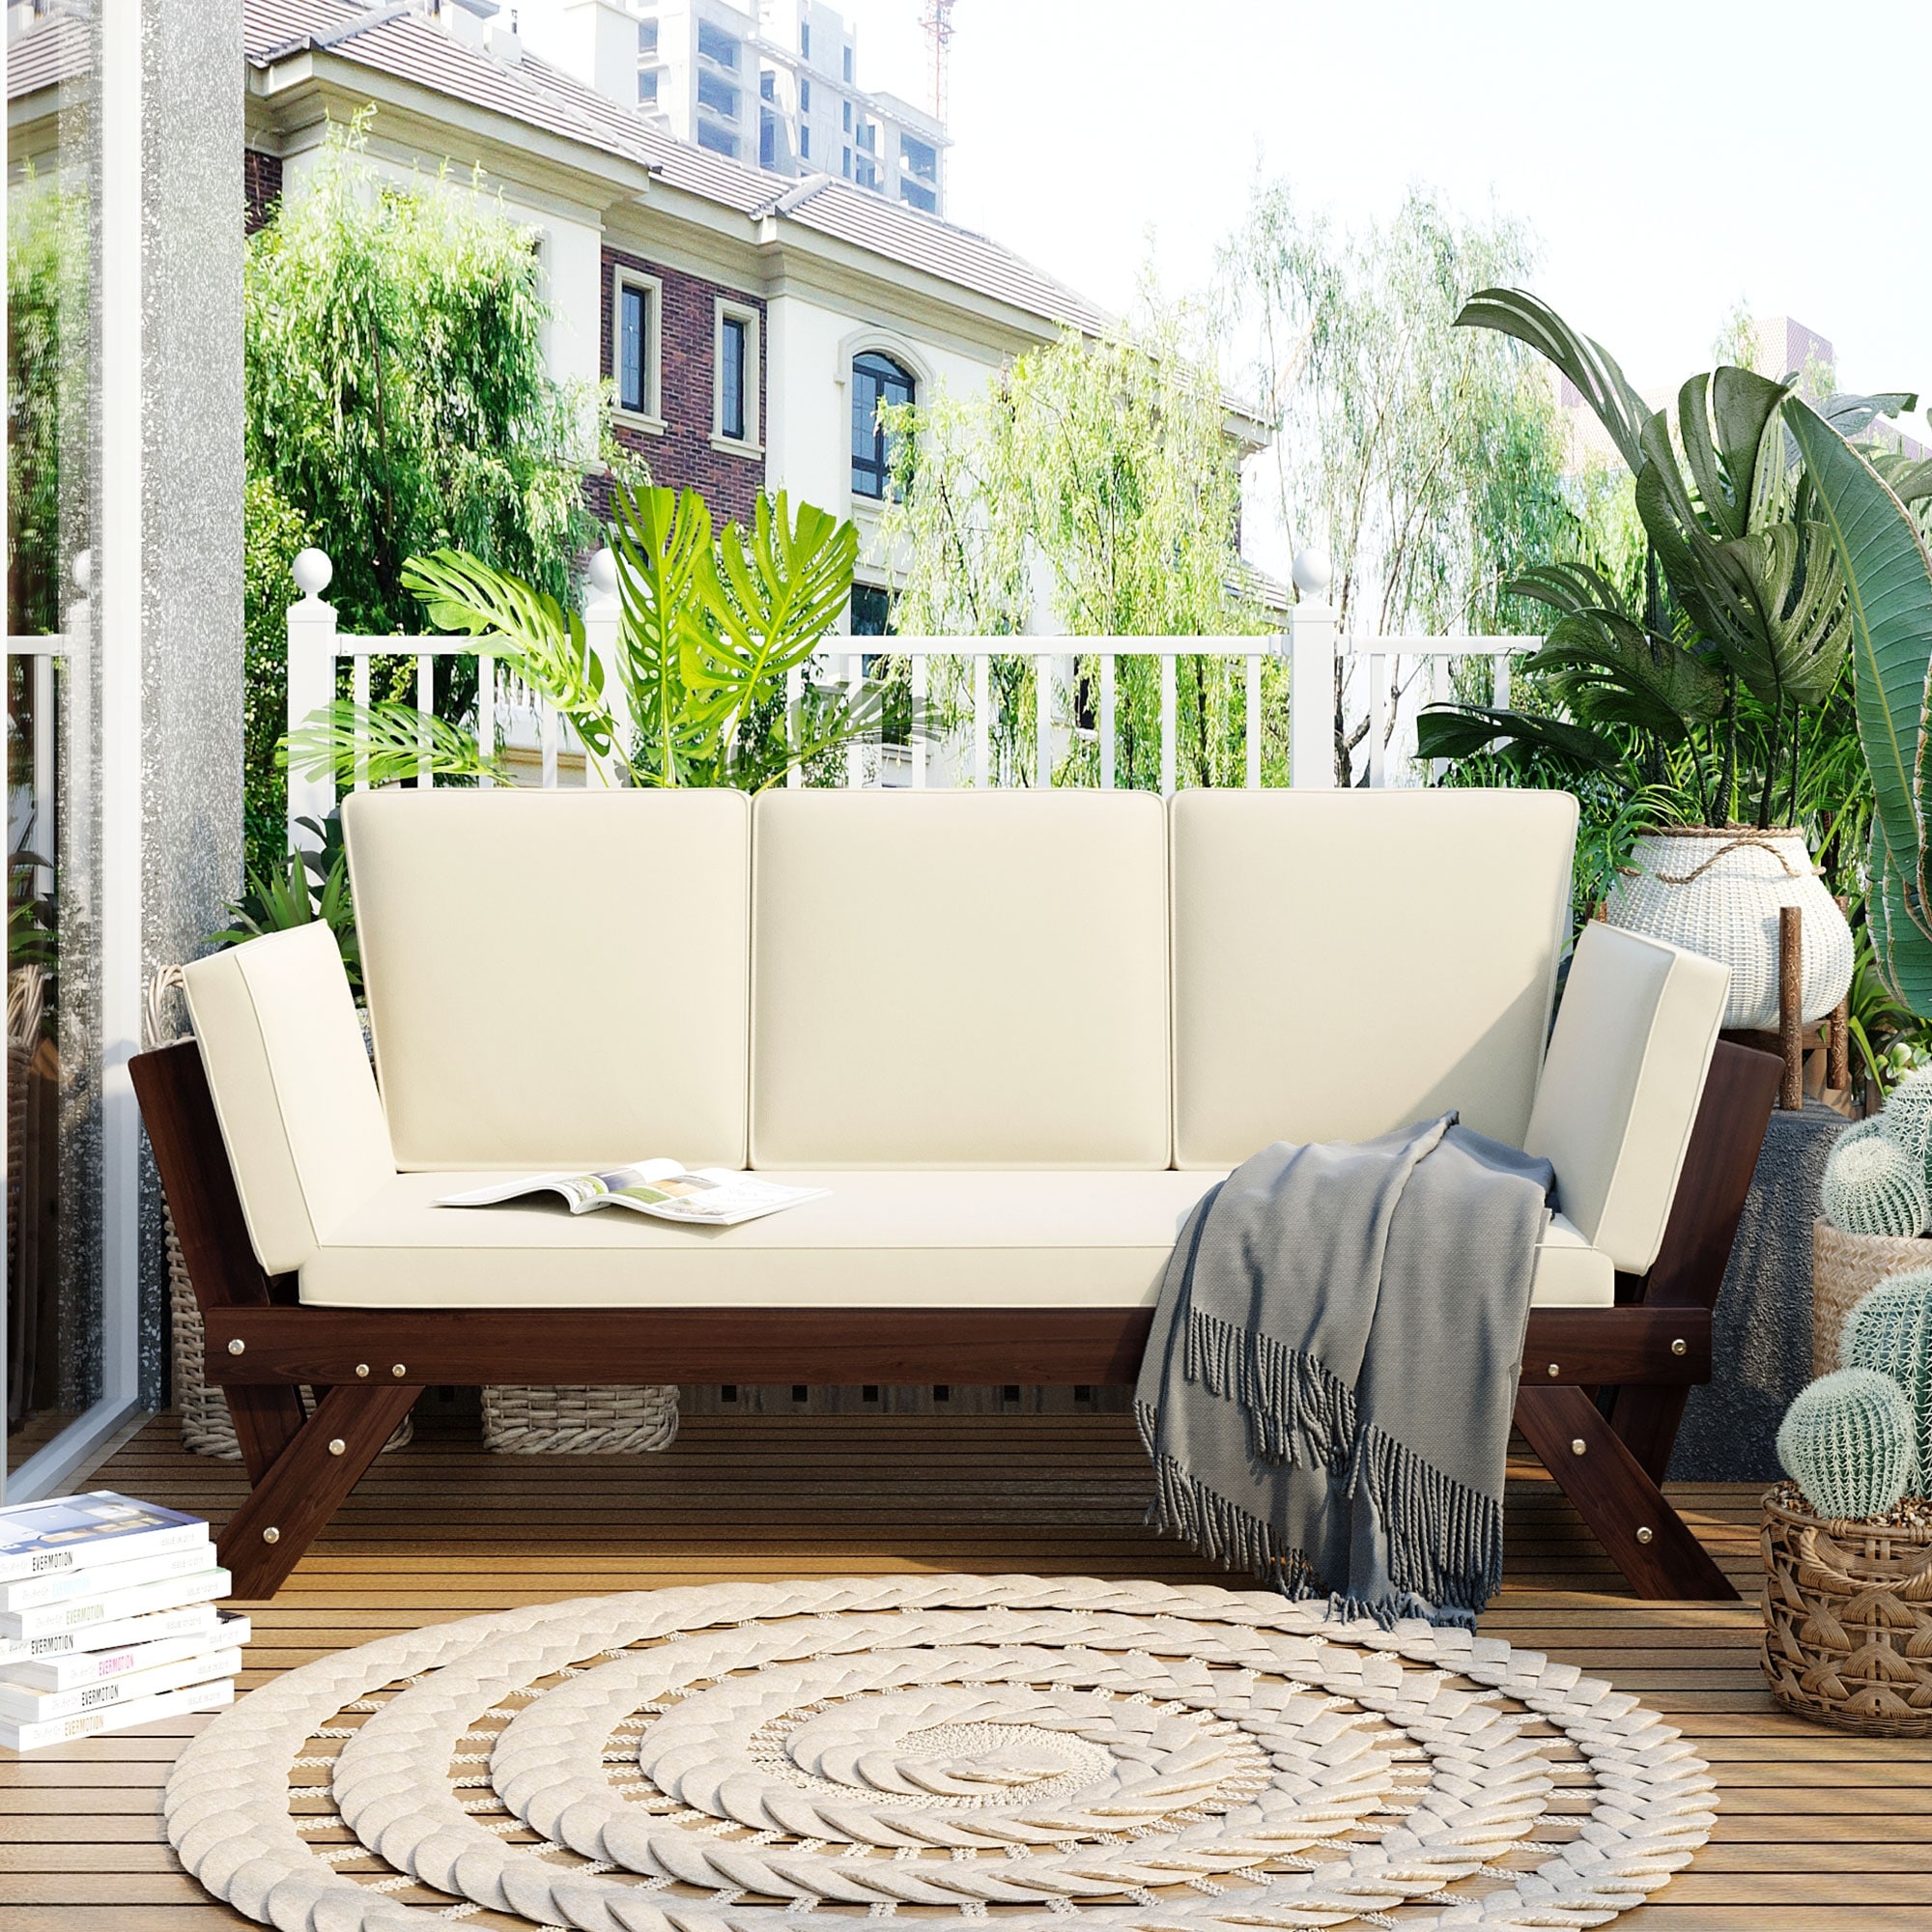 Outdoor Convertible Sofa Wooden Daybed Sofa Patio Furniture Chaise Lounge With Cushions For Courtyard/ Patio/ Balcony